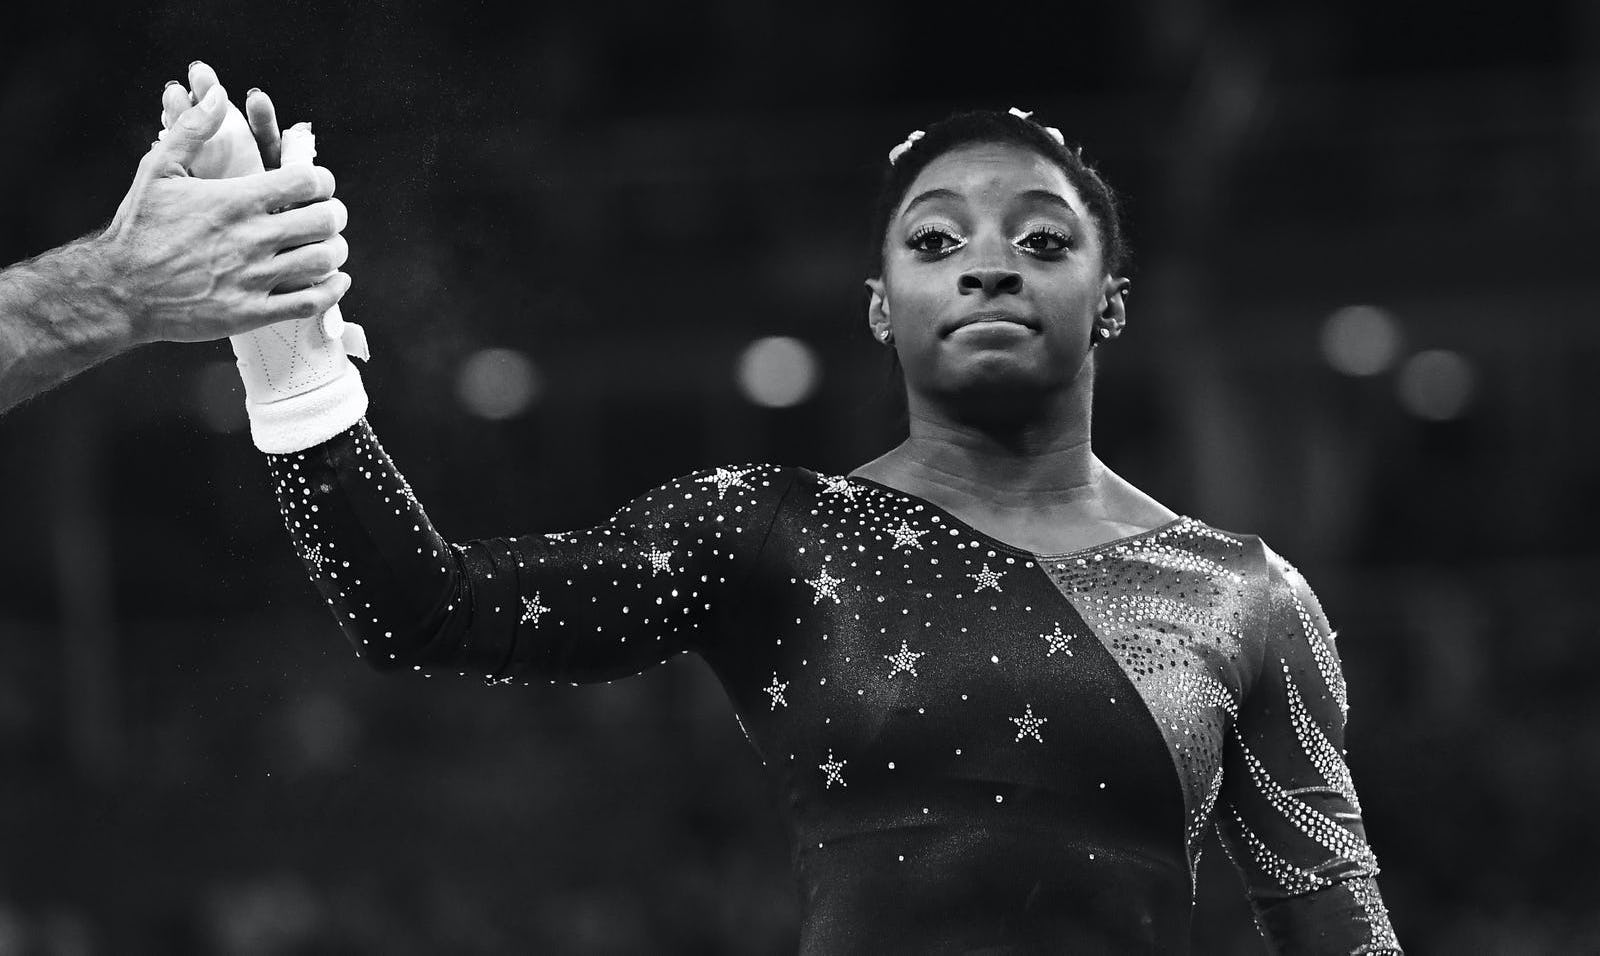 A black and white photo of Simone Biles high diving someone out of frame.